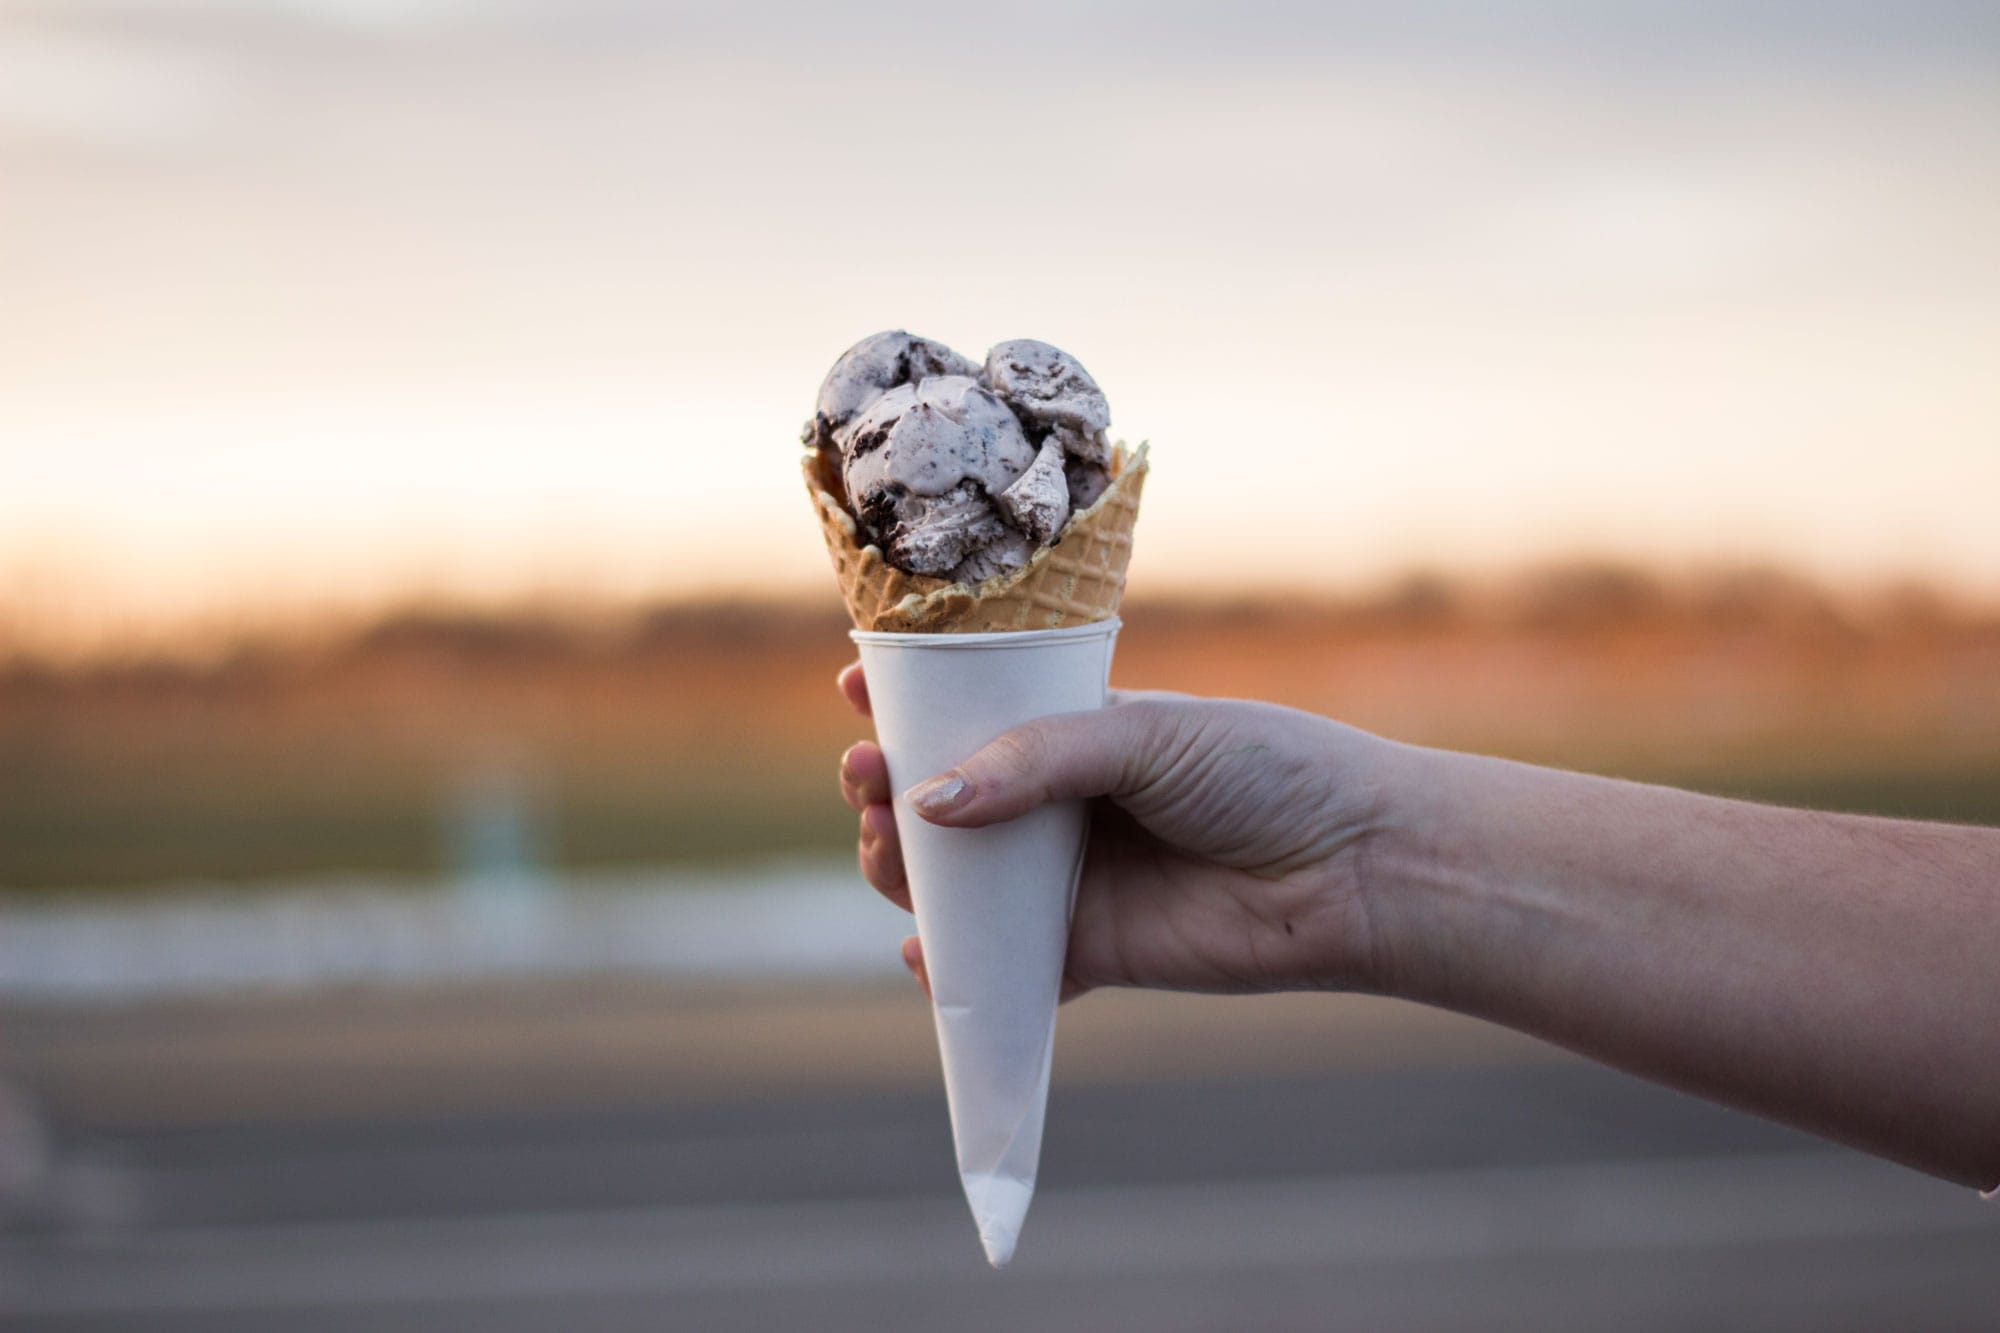 I love stopping for ice cream on vacation. Here's 8 unforgettable place for cold treats in the USA.